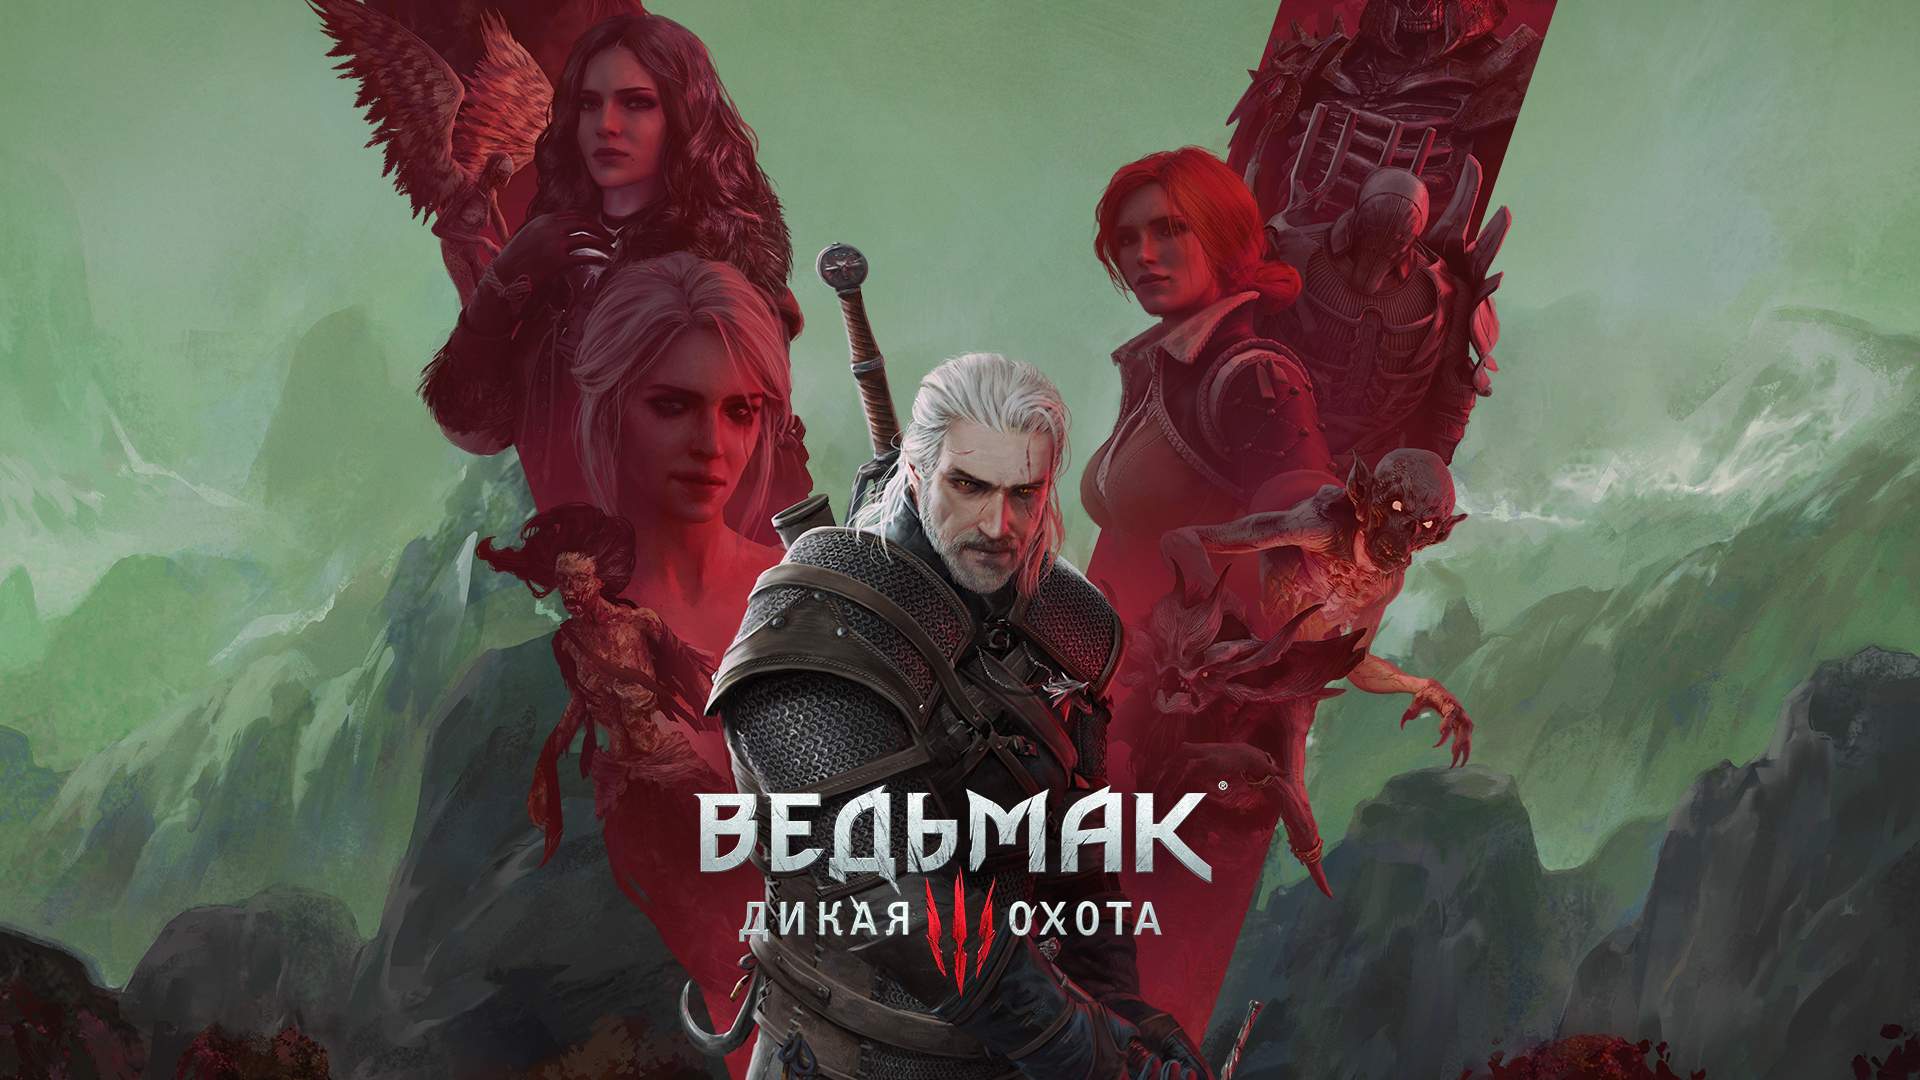 thewitcher.com | Home of The Witcher games